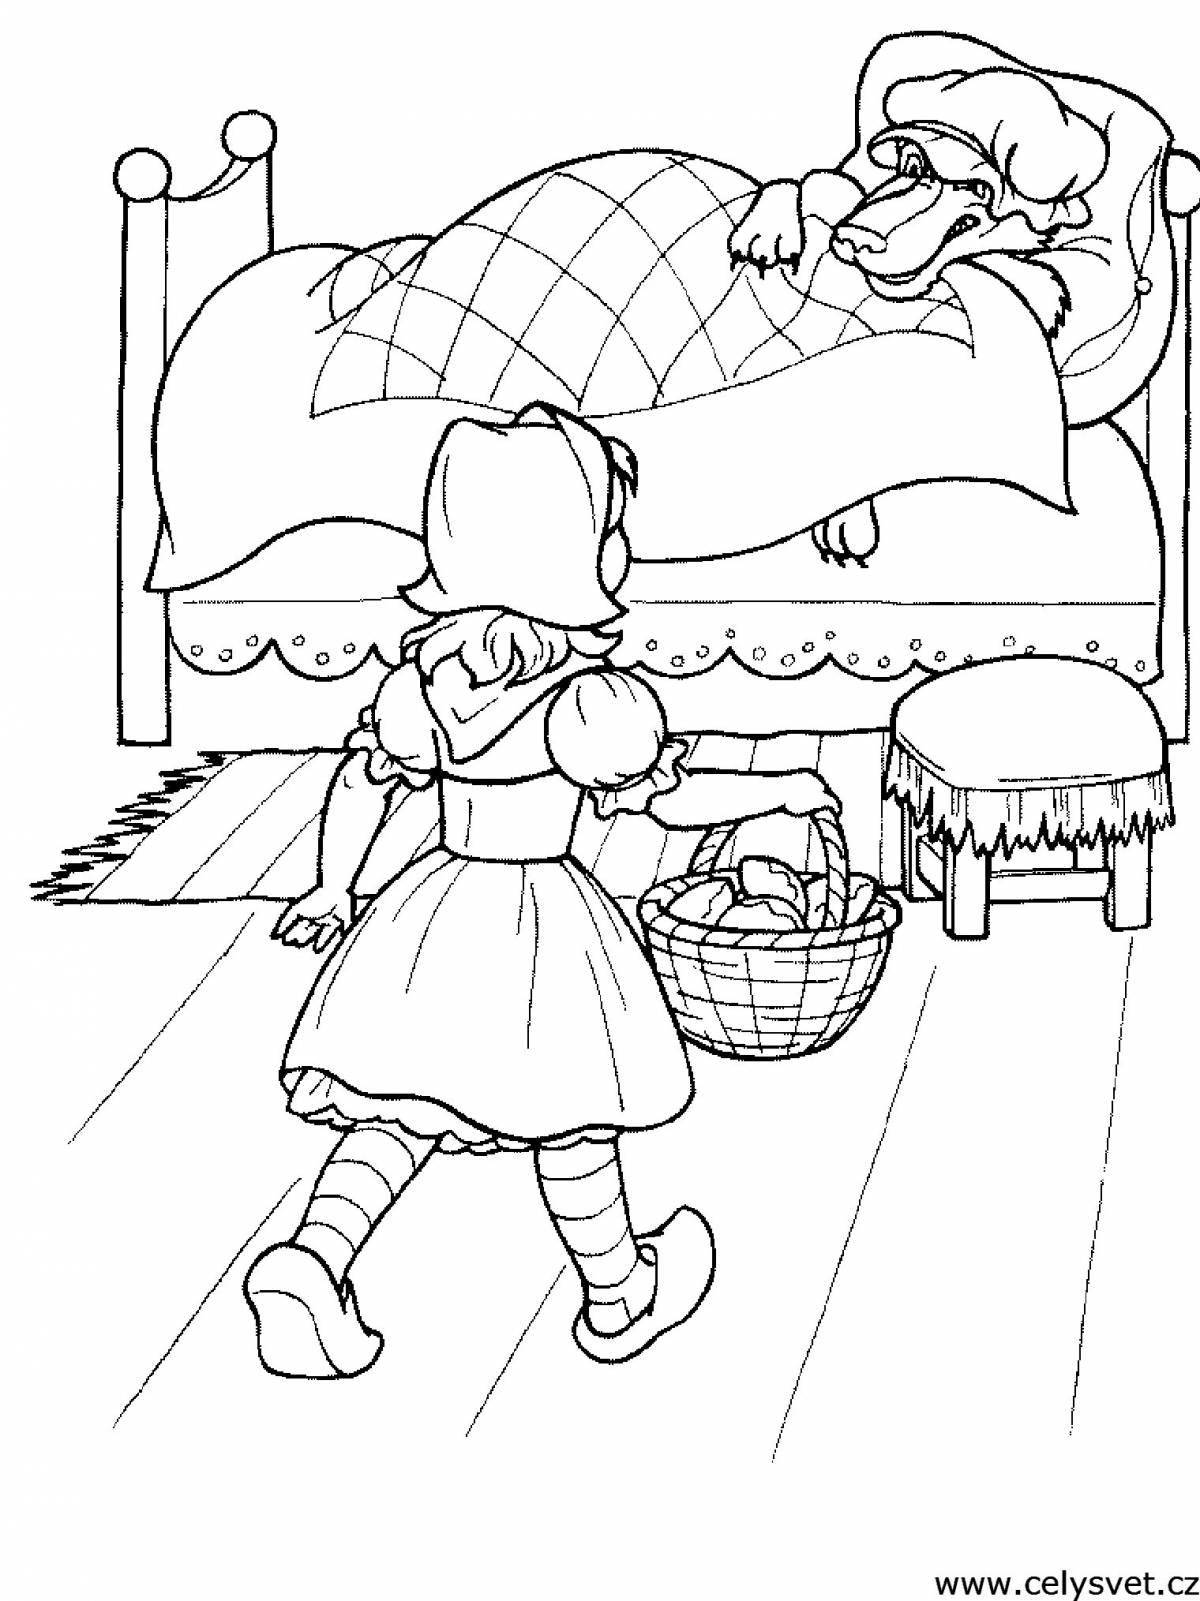 Cute gray wolf and little red riding hood coloring book